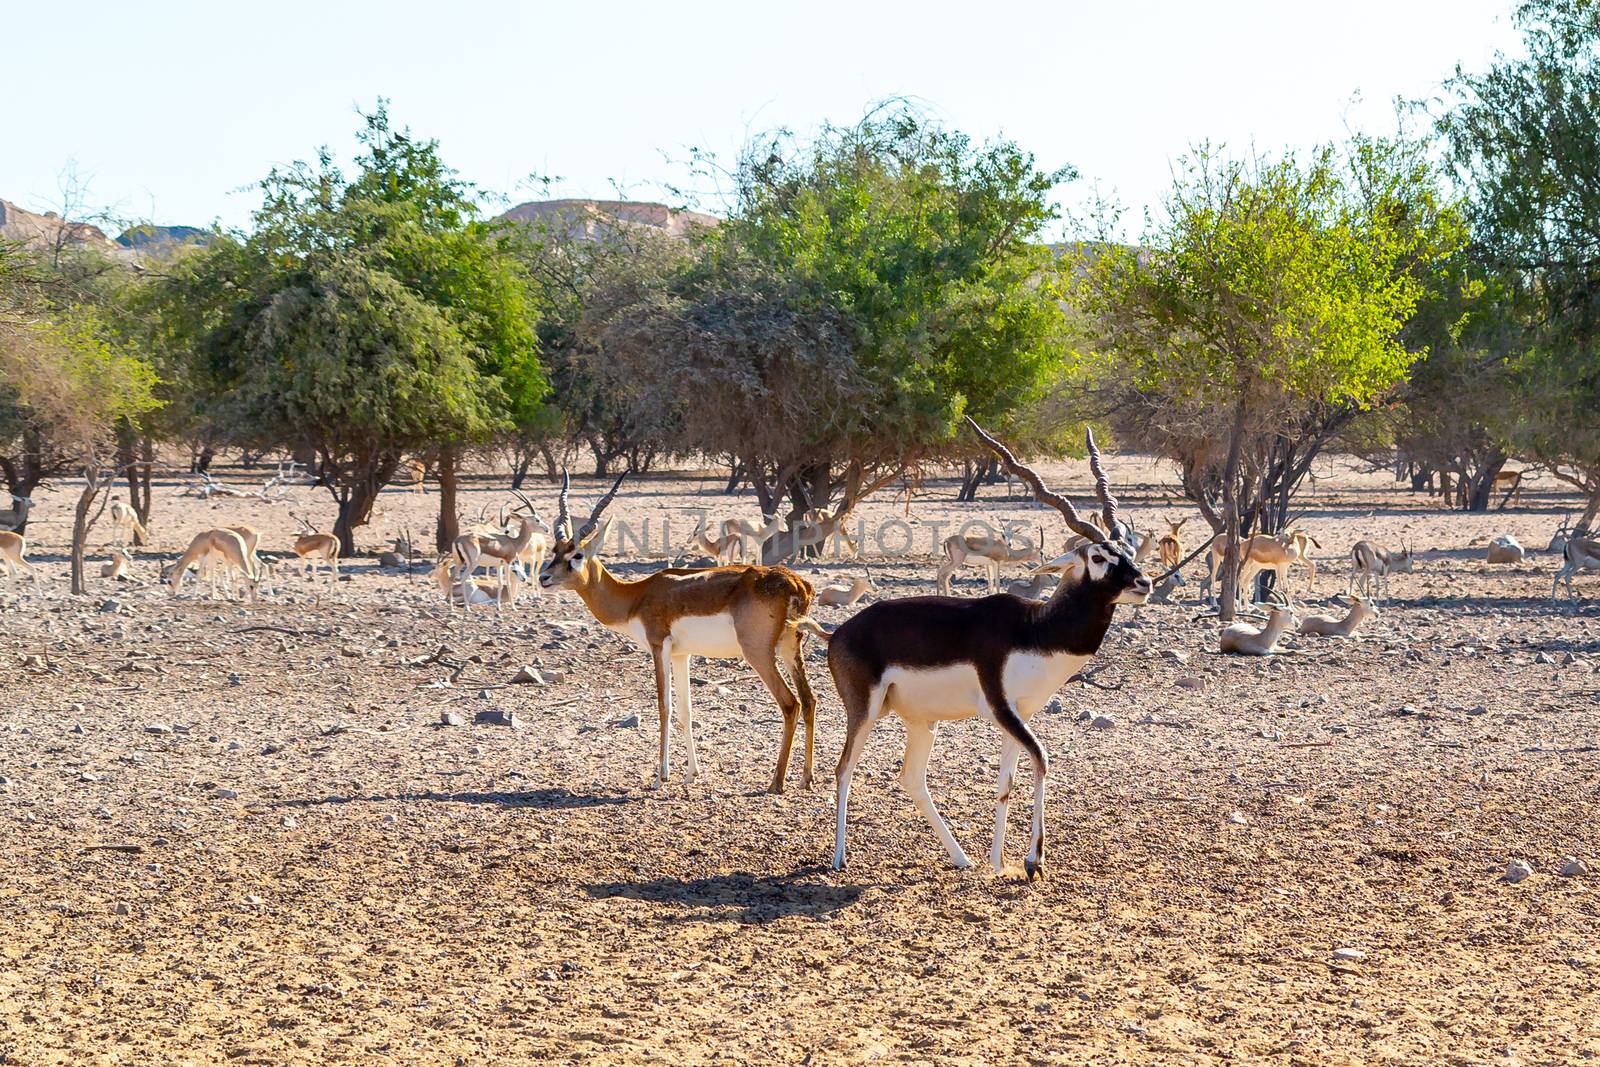 Antelope group in a safari park on the island of Sir Bani Yas, United Arab Emirates by galsand